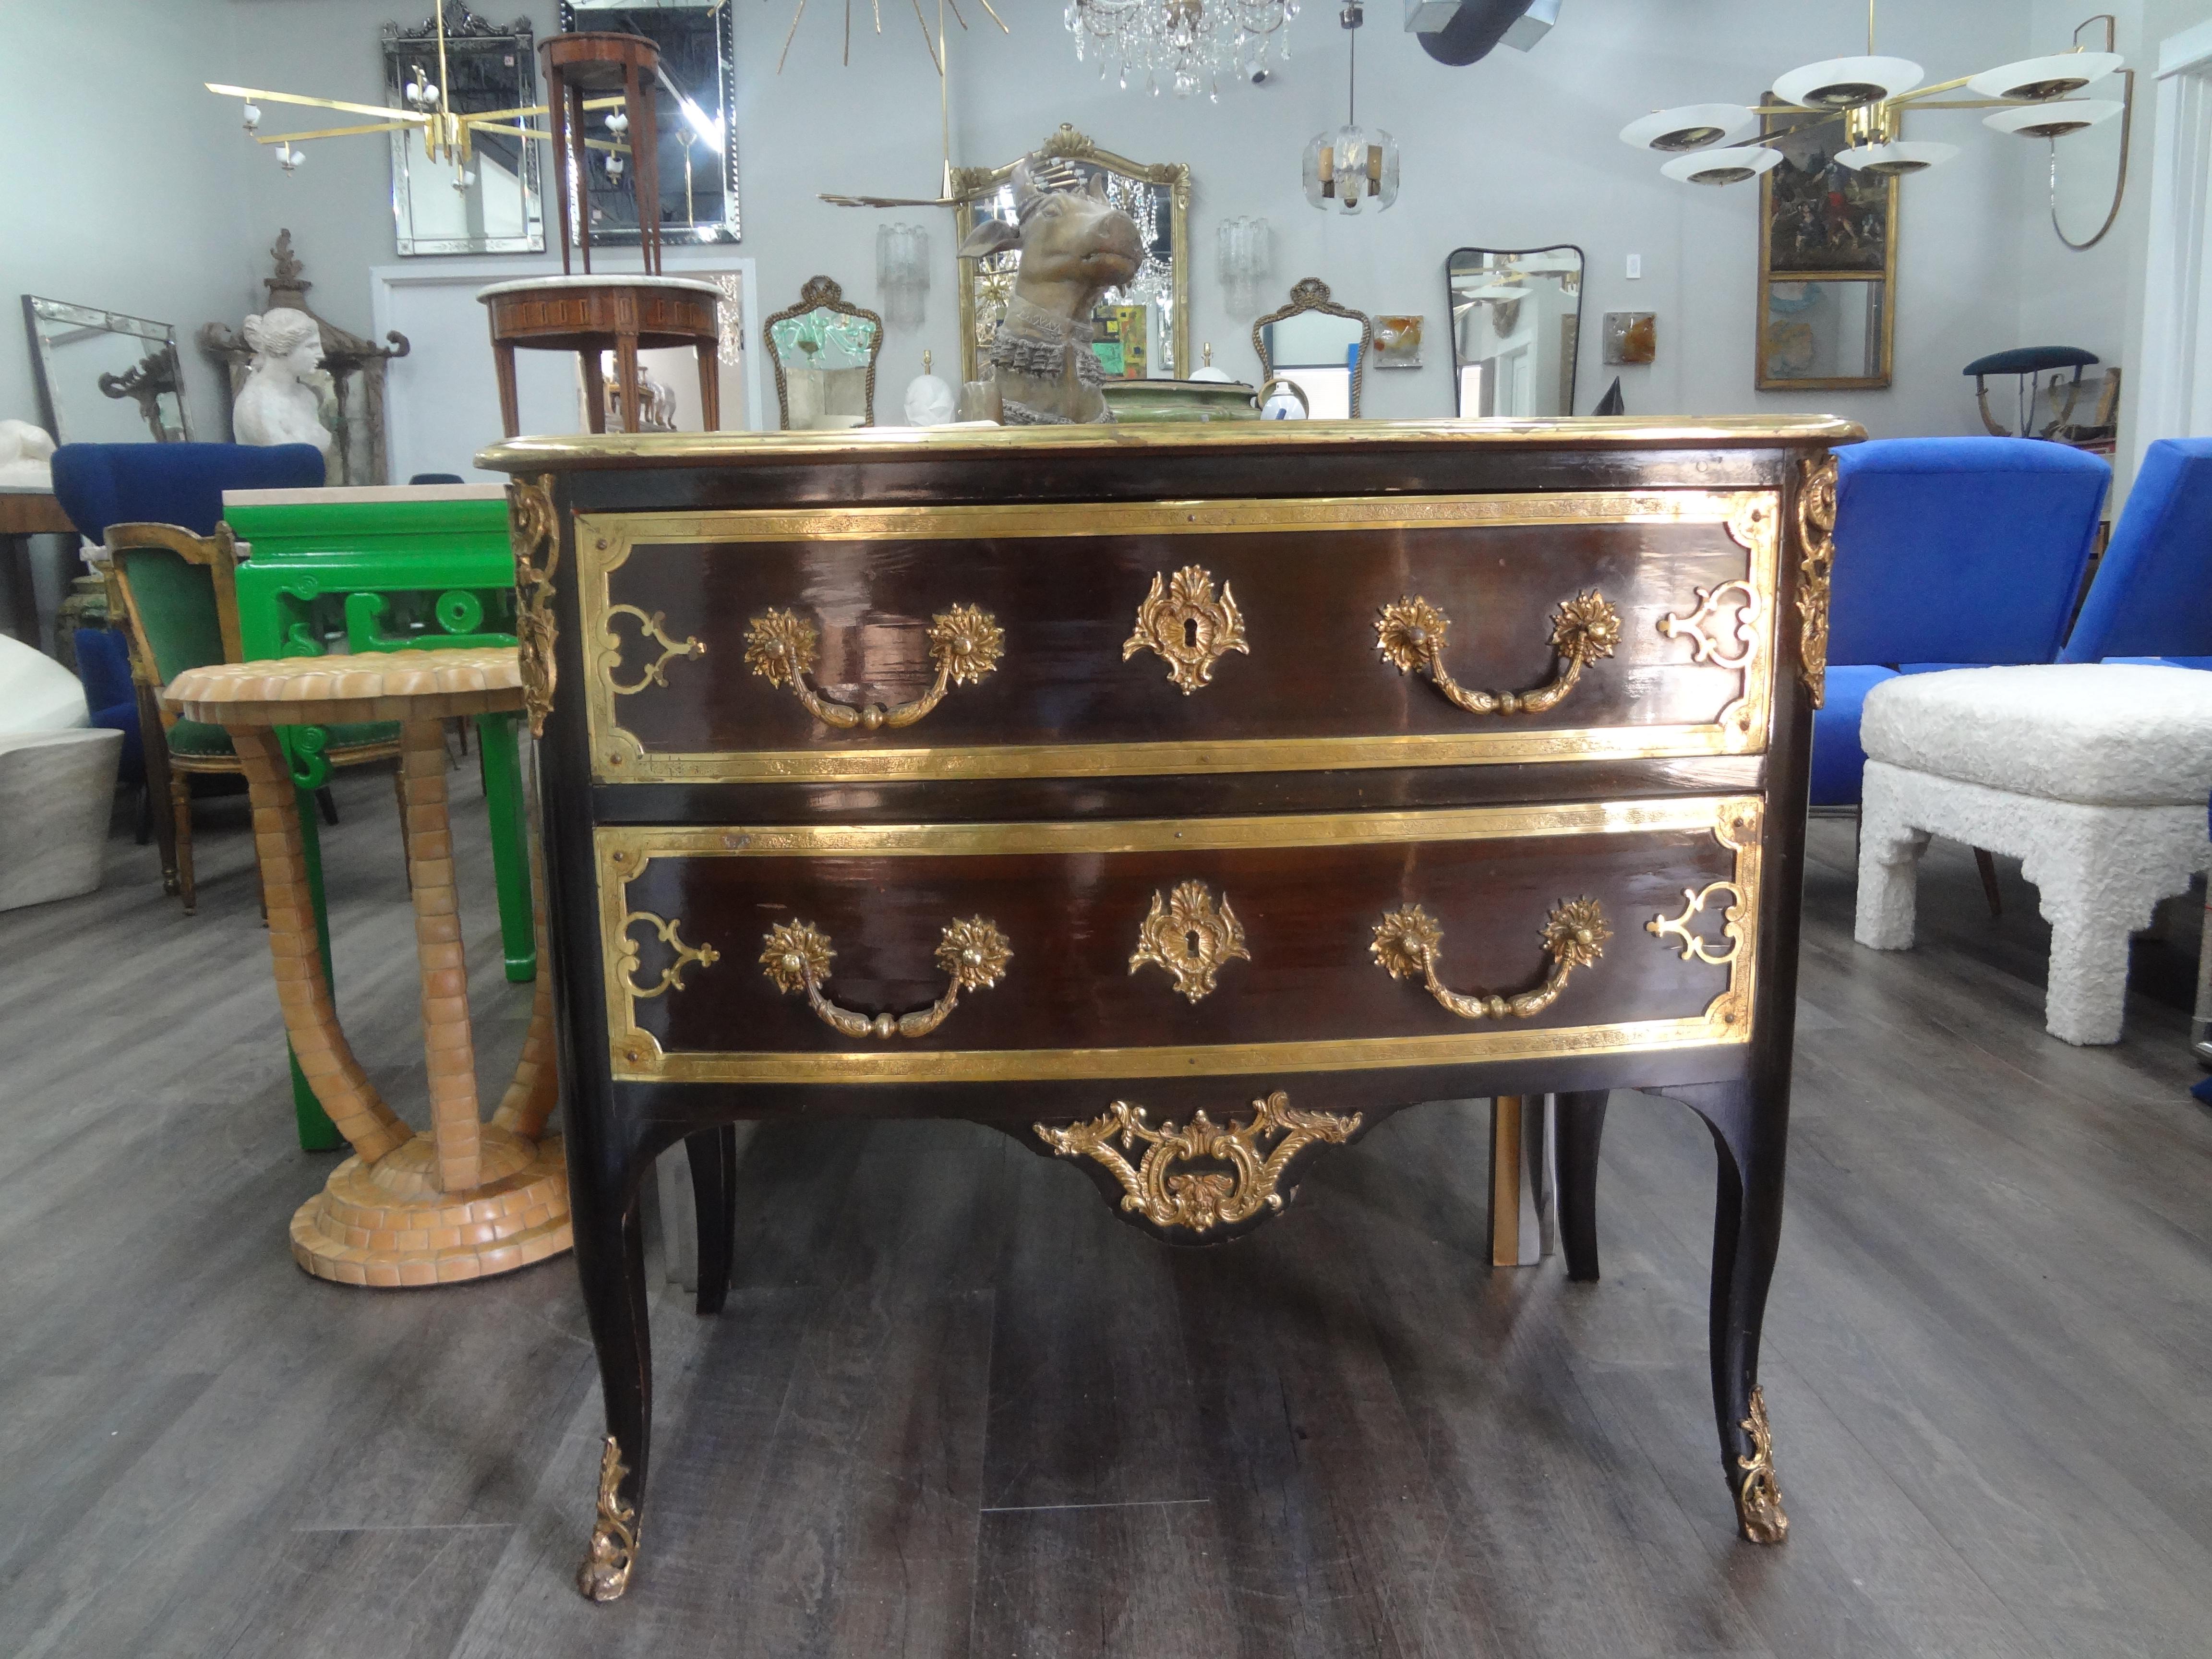 Late 19th Century French Louis XV Style Ebonized Commode or Chest.
This stunning French Louis XV style ebonized two drawer chest has beautiful gilt bronze hardware and the original locks and key.
Gorgeous!